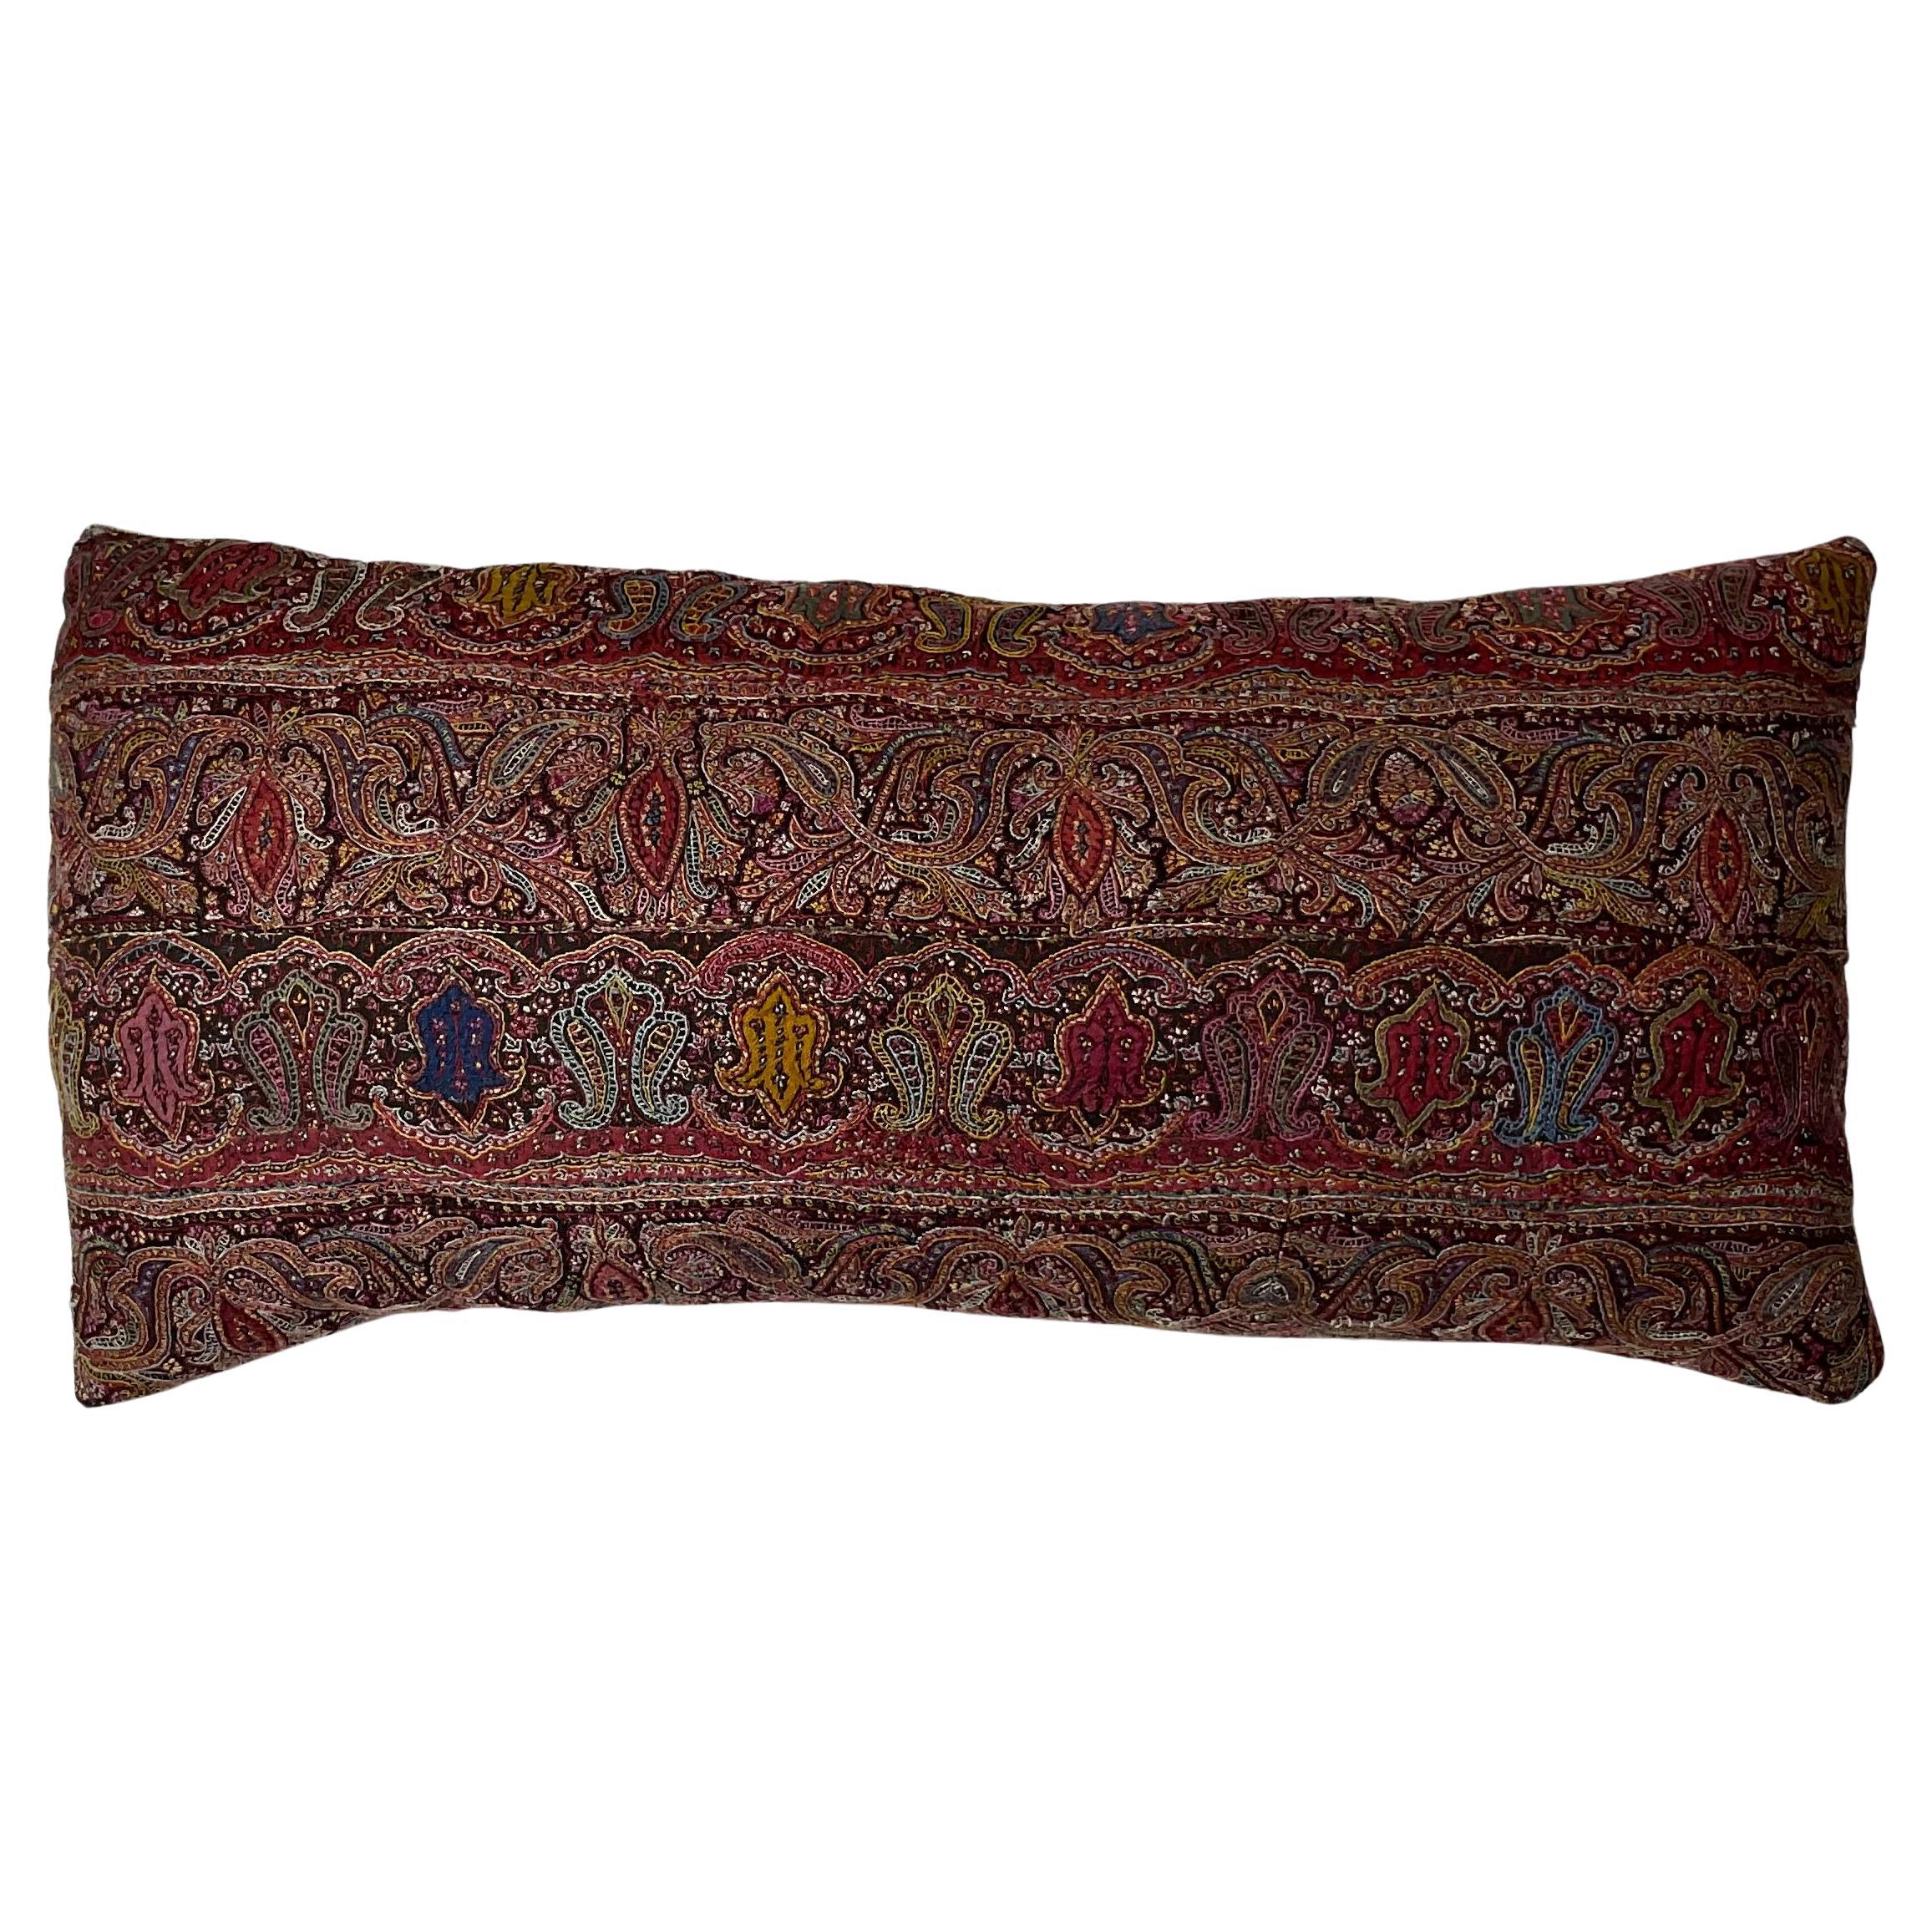 Single Hand Embroidery Persian Suzani Pillow For Sale